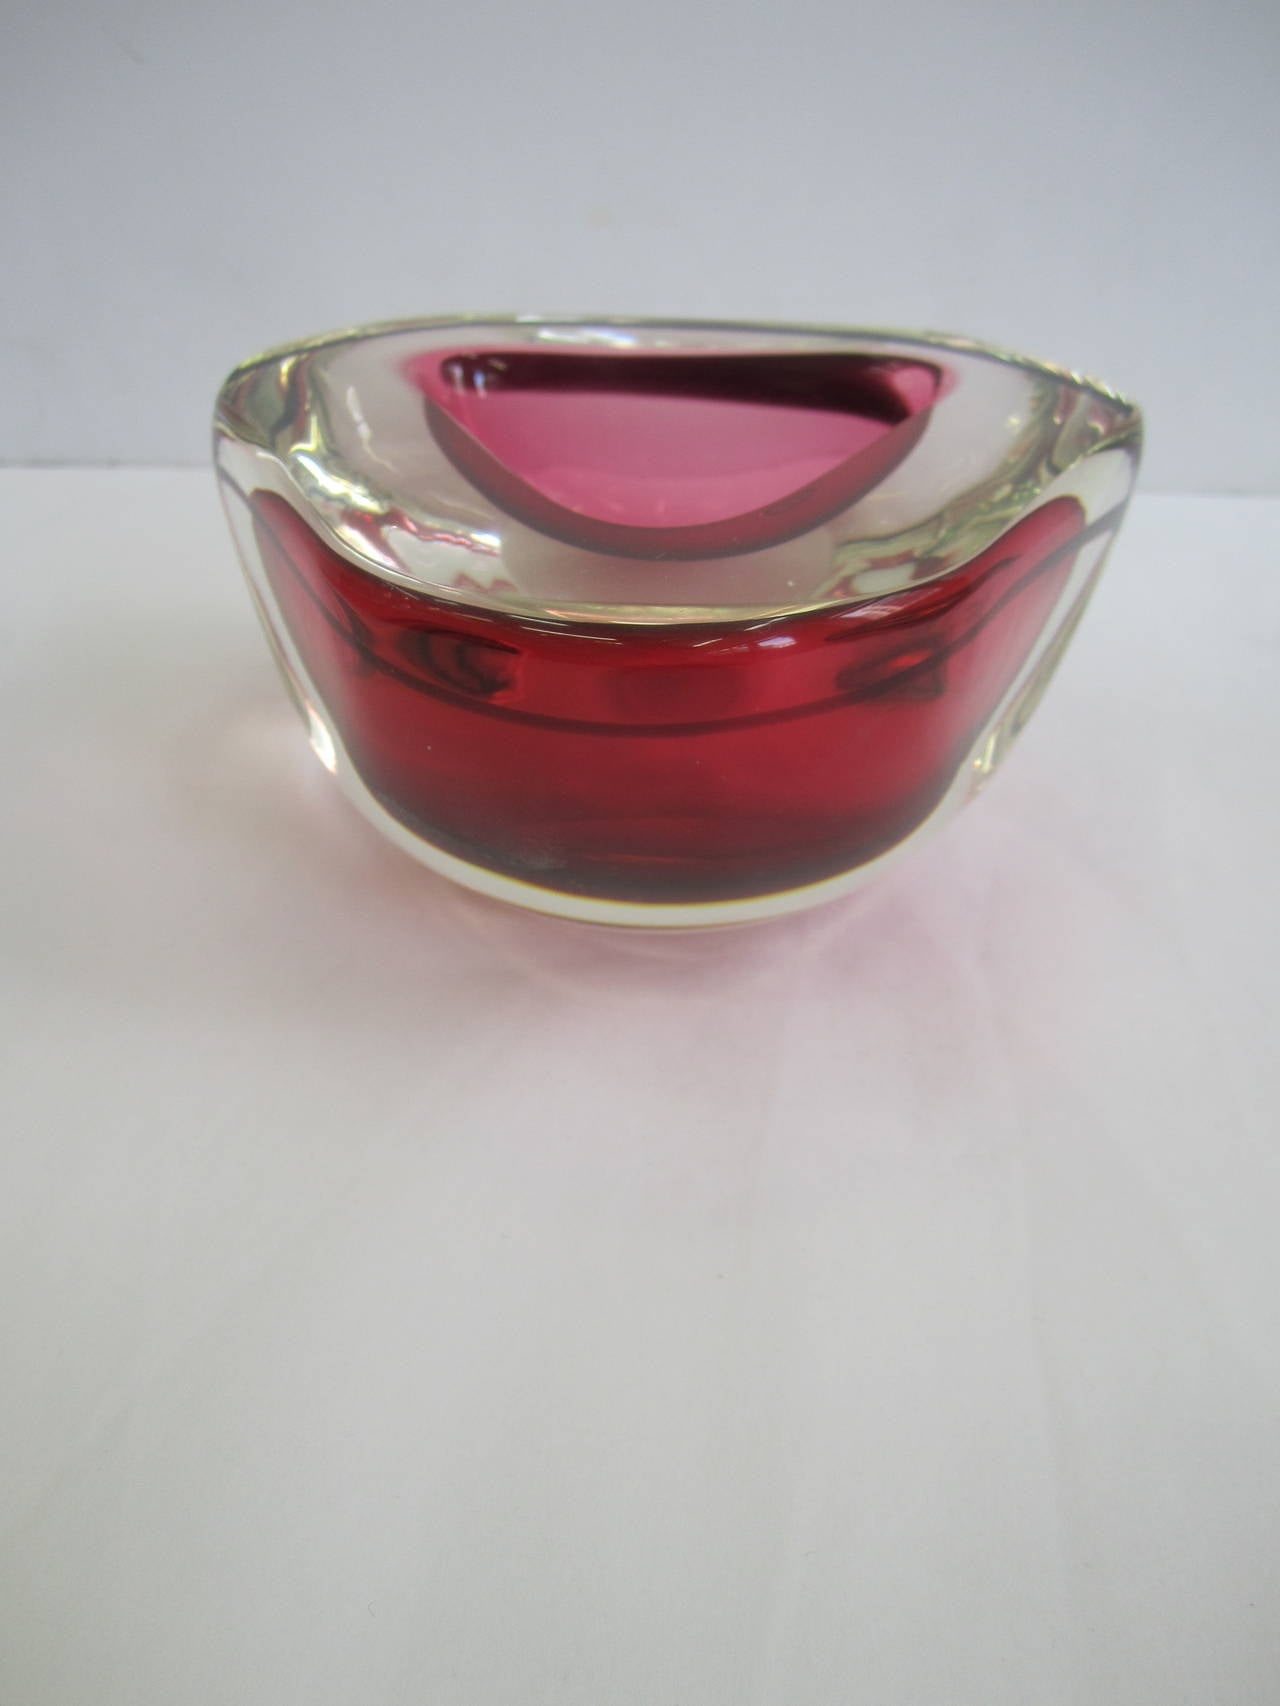 A beautiful and substantial Modern Italian Murano art glass bowl in red raspberry and clear, with soft edges, circa late 20th Century, Italy. Attributed to Flavio Poli for Seguso. Bowl measures: 3